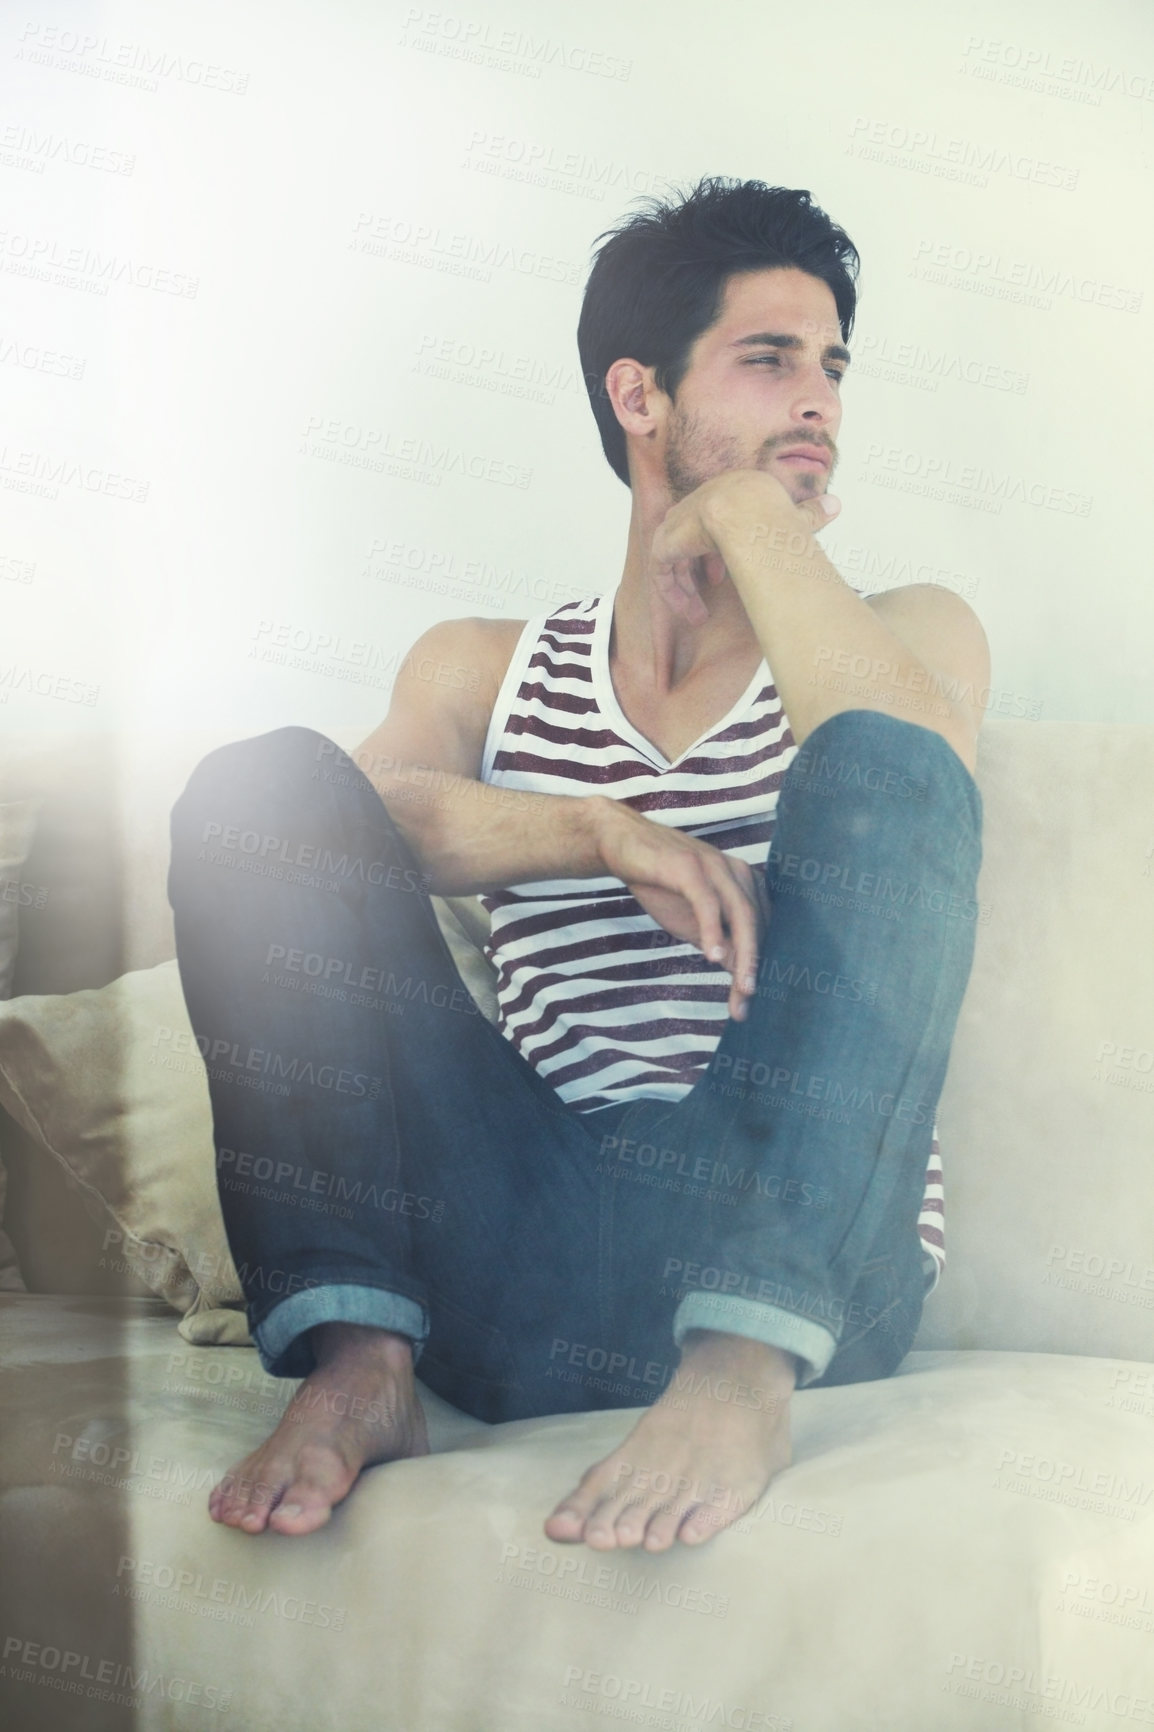 Buy stock photo A young attractive male sitting casually with his feet up on a sofa contemplating - Copyspace